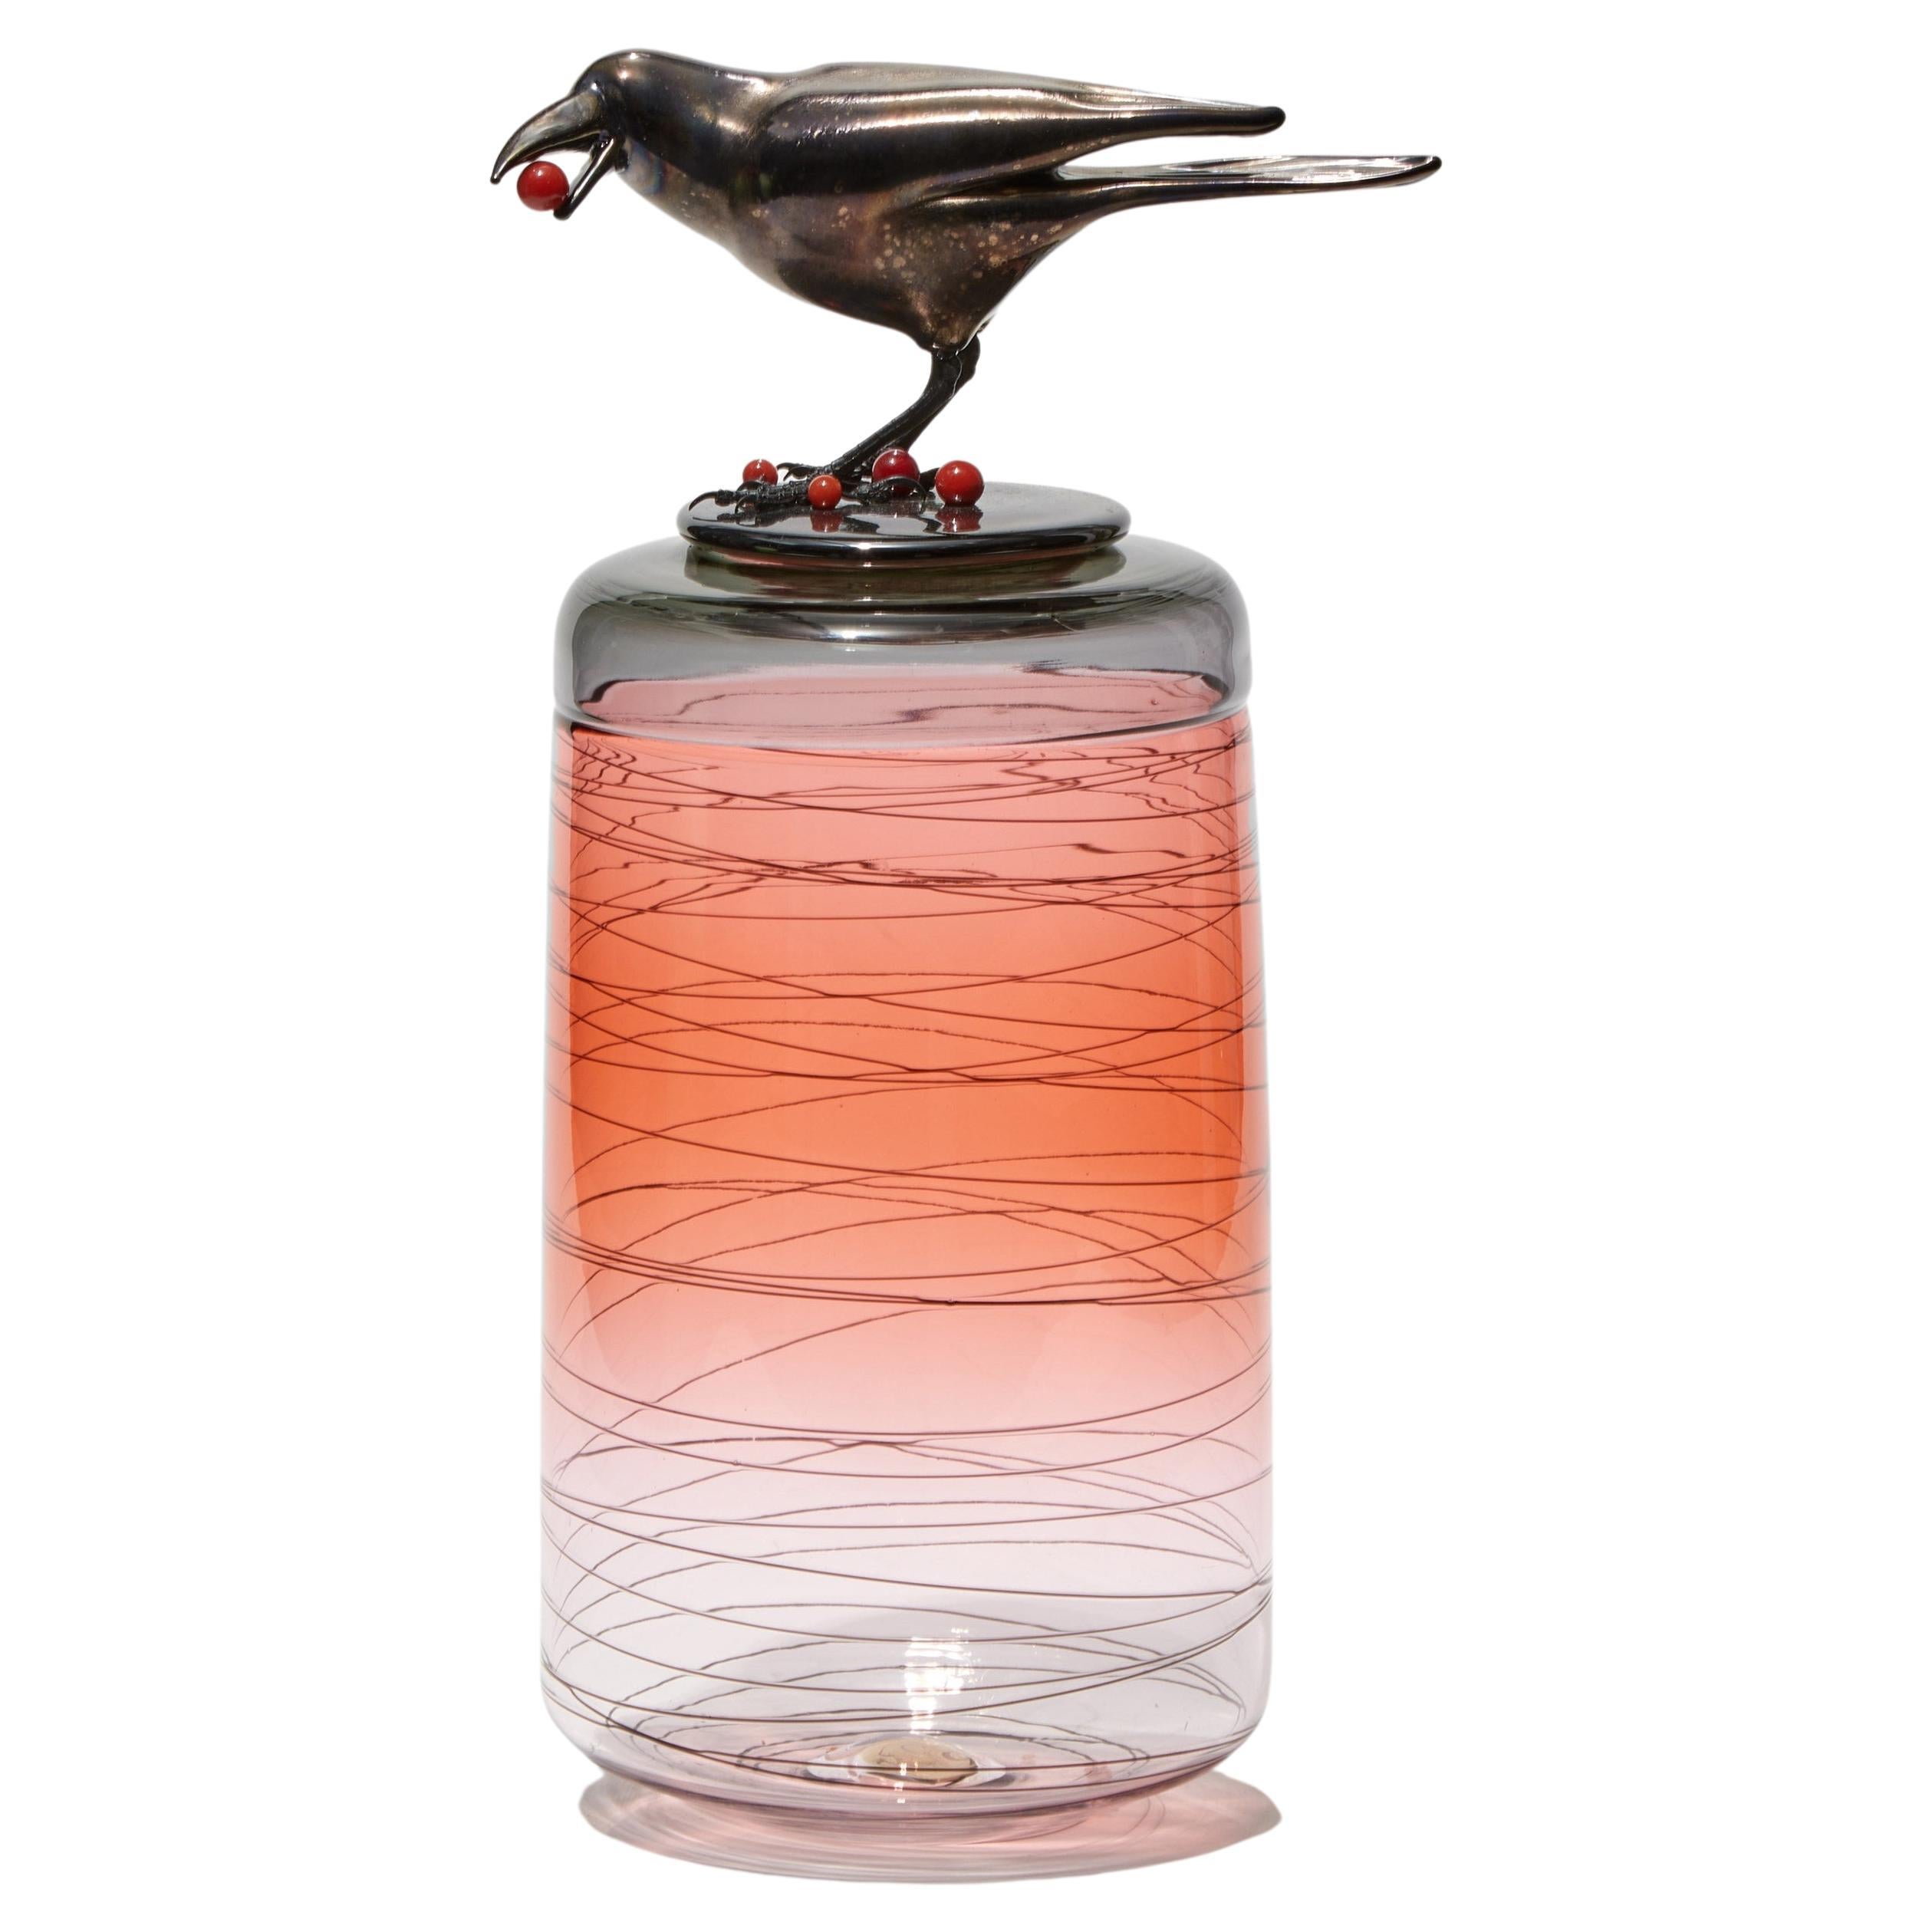 Cranberries II, a Peach Glass Sculptural Vase with Black Crow by Julie Johnson